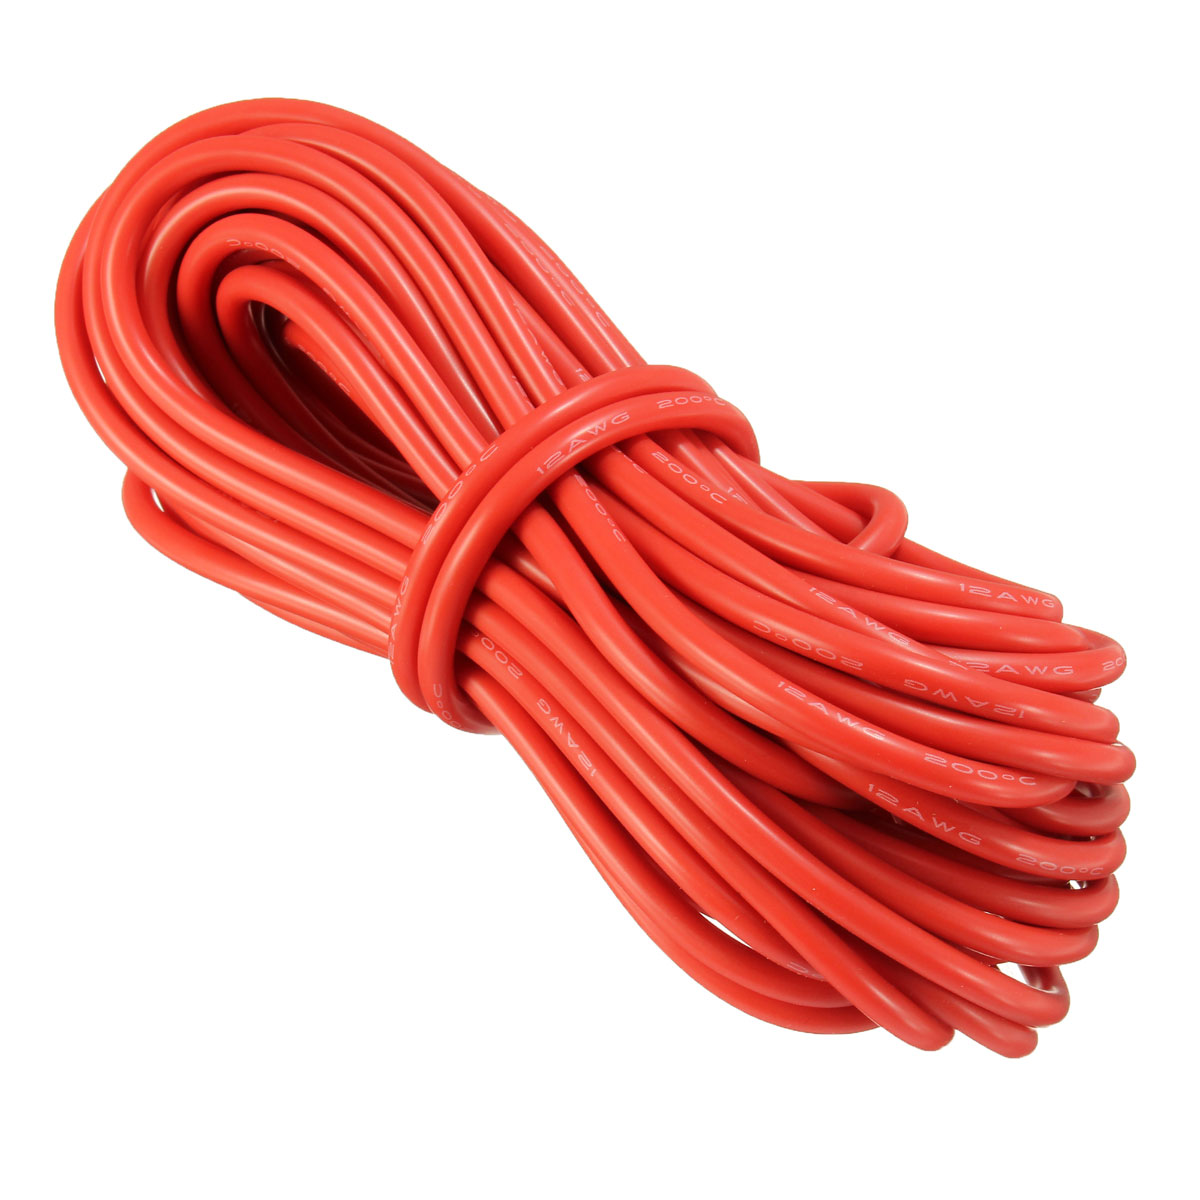 DANIU-10-Meter-Red-Silicone-Wire-Cable-10121416182022AWG-Flexible-Cable-1170297-8